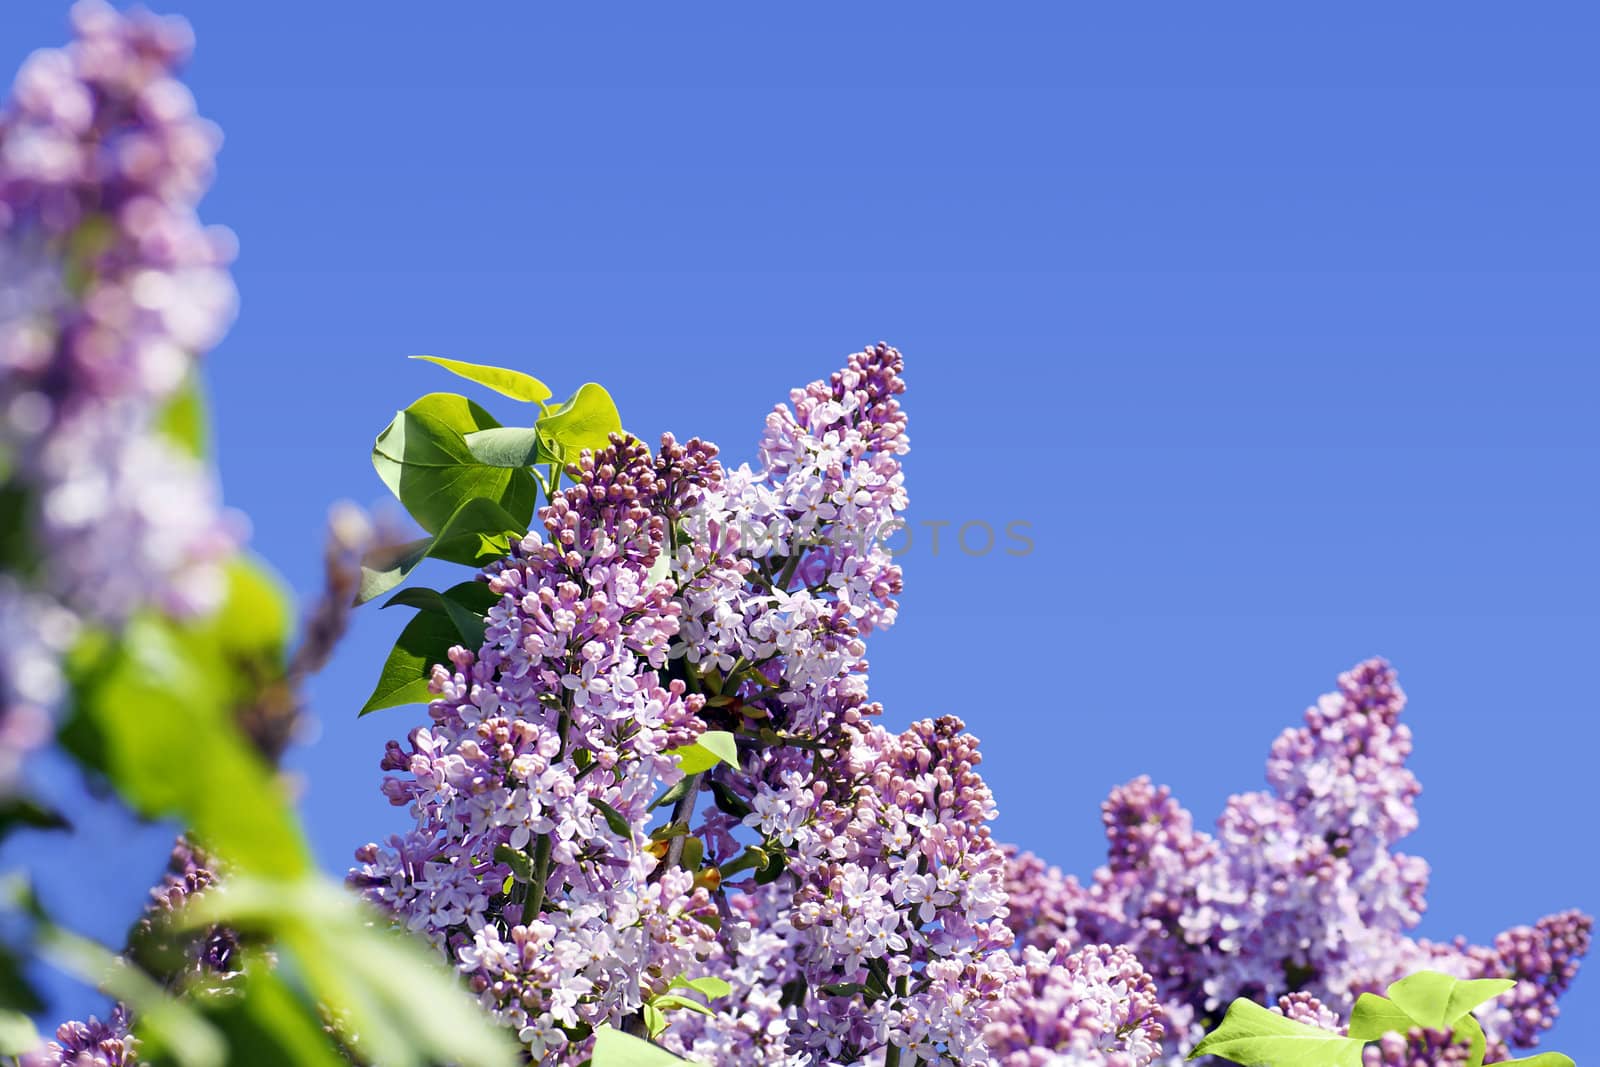 Simple yet beautiful lilac tree in bloom with cute little purple flowers contrasted by a bright blue sky, perfect floral background with copy space.